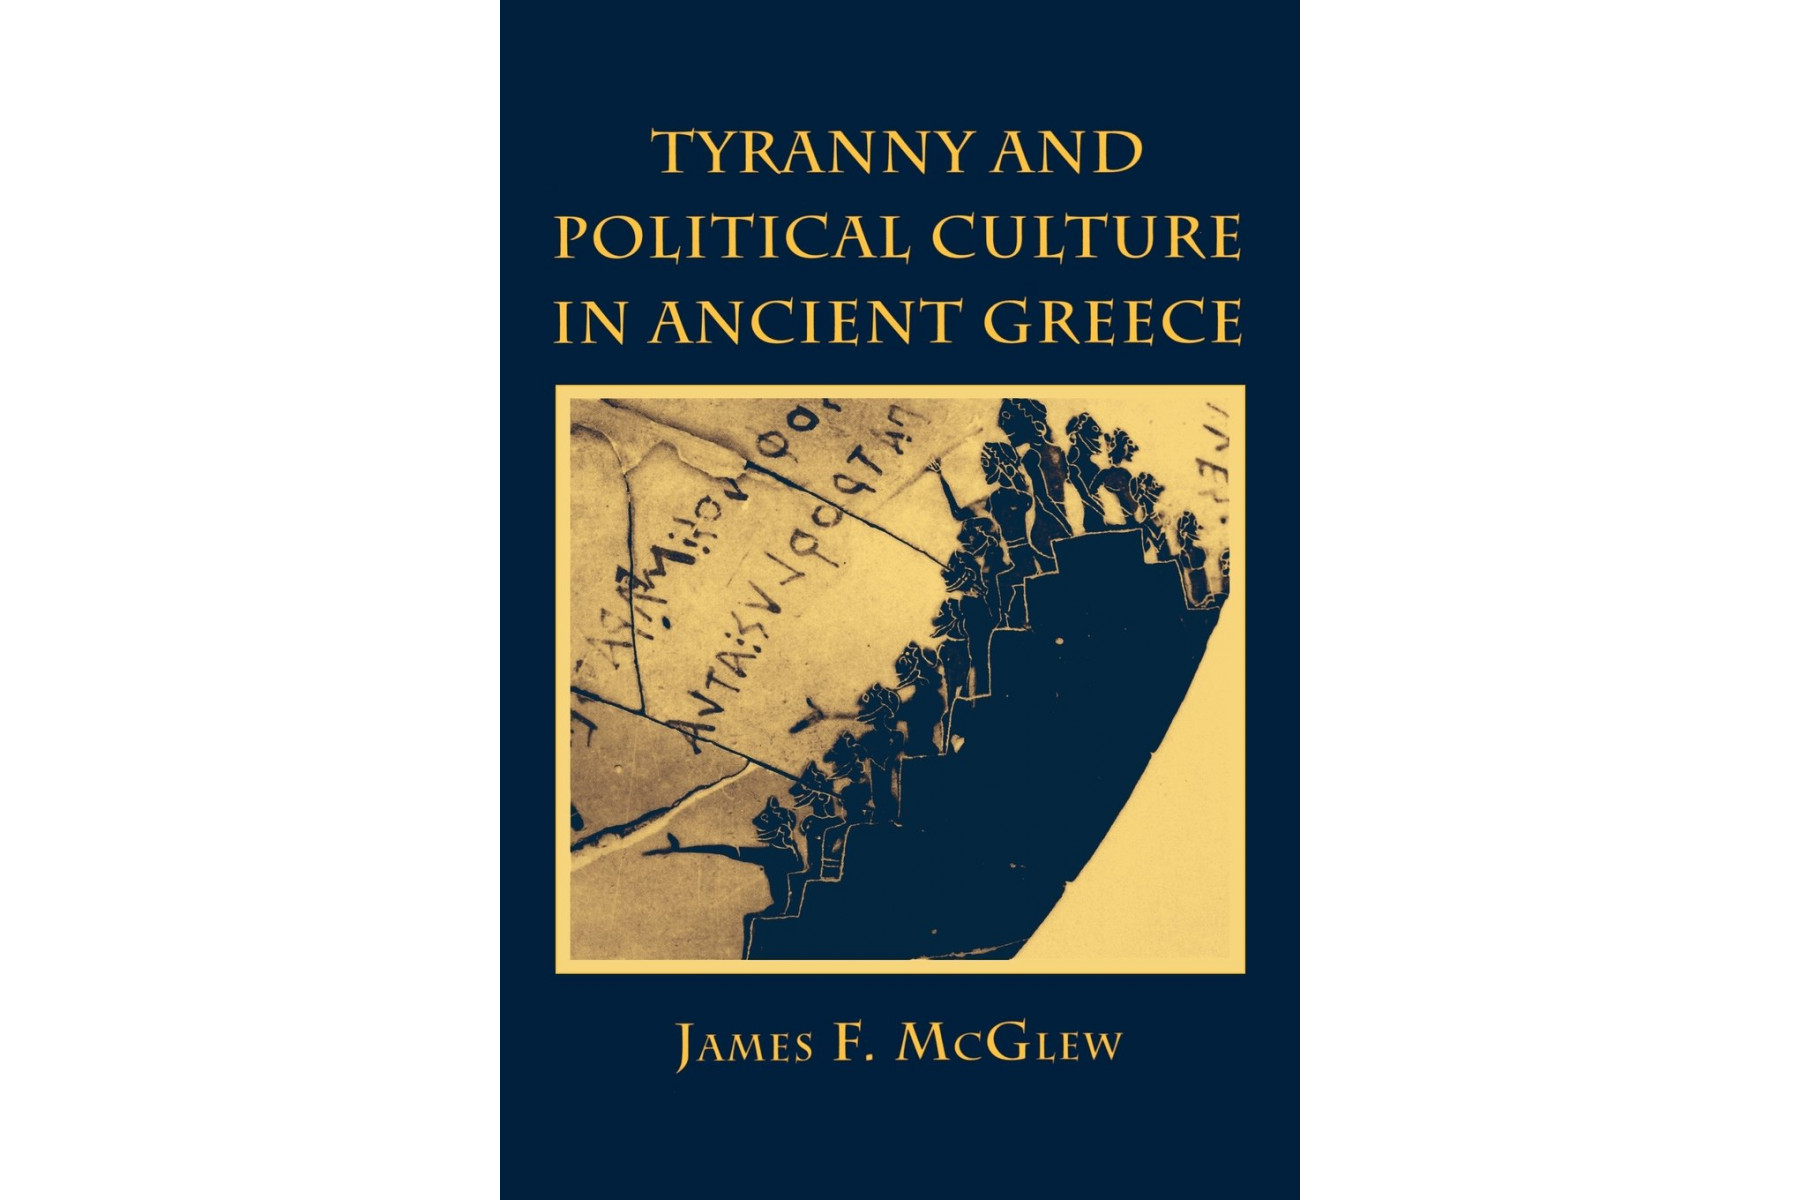 Tyranny and Political Culture in Ancient Greece: A Regional Perspective (1812-1846)